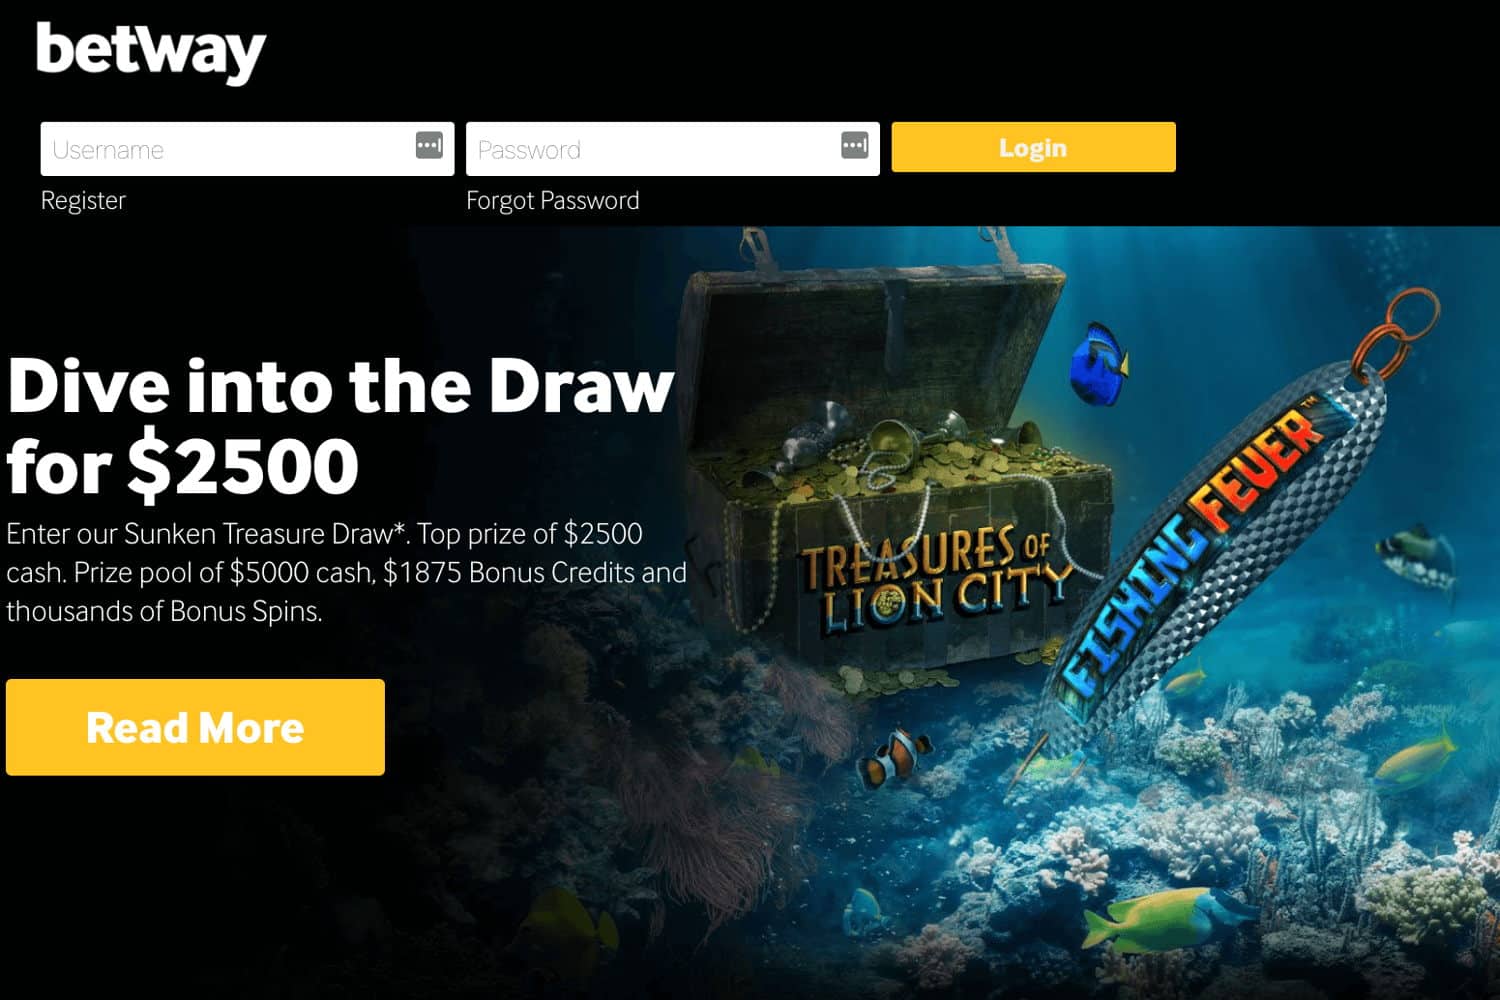 Best Casino Offers At Betway